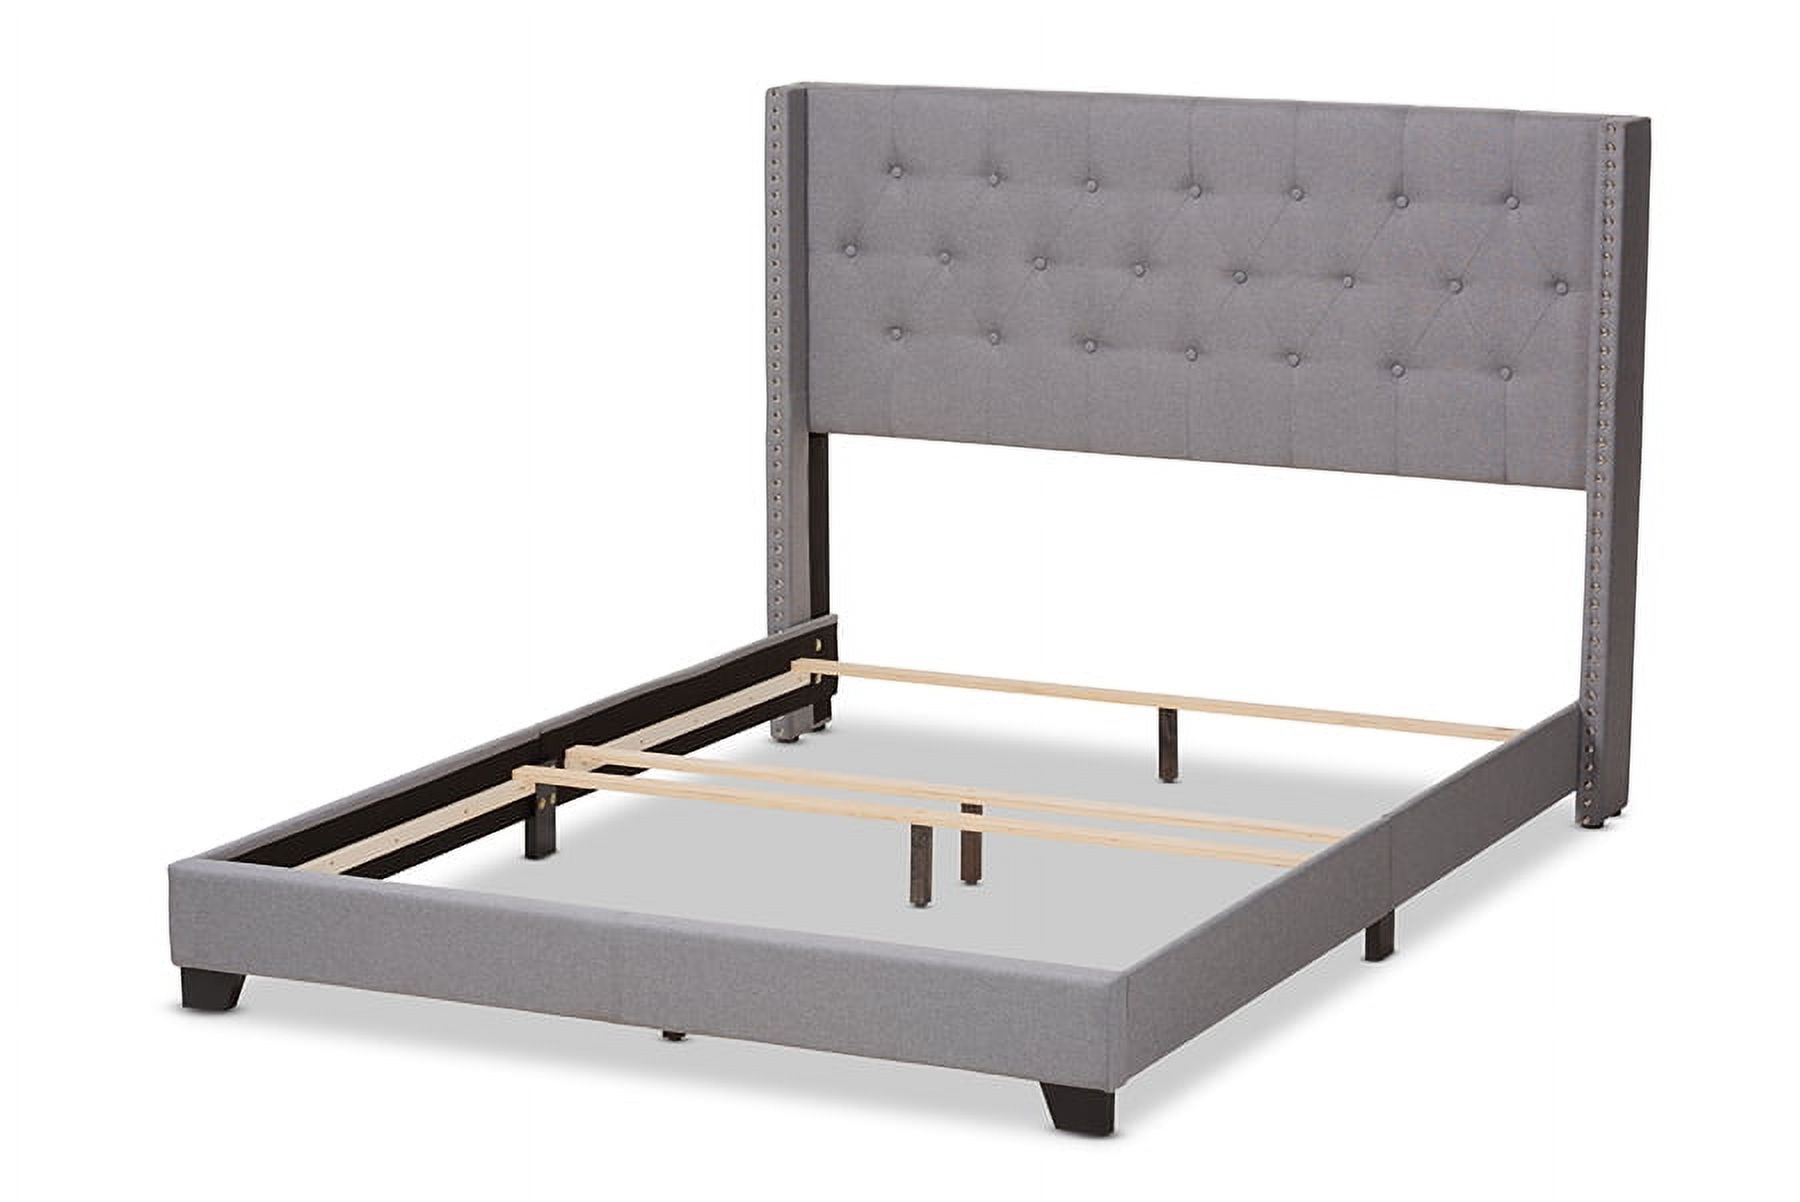 Baxton Studio Brady Modern and Contemporary Light Grey Fabric Upholstered King Size Bed - image 5 of 10